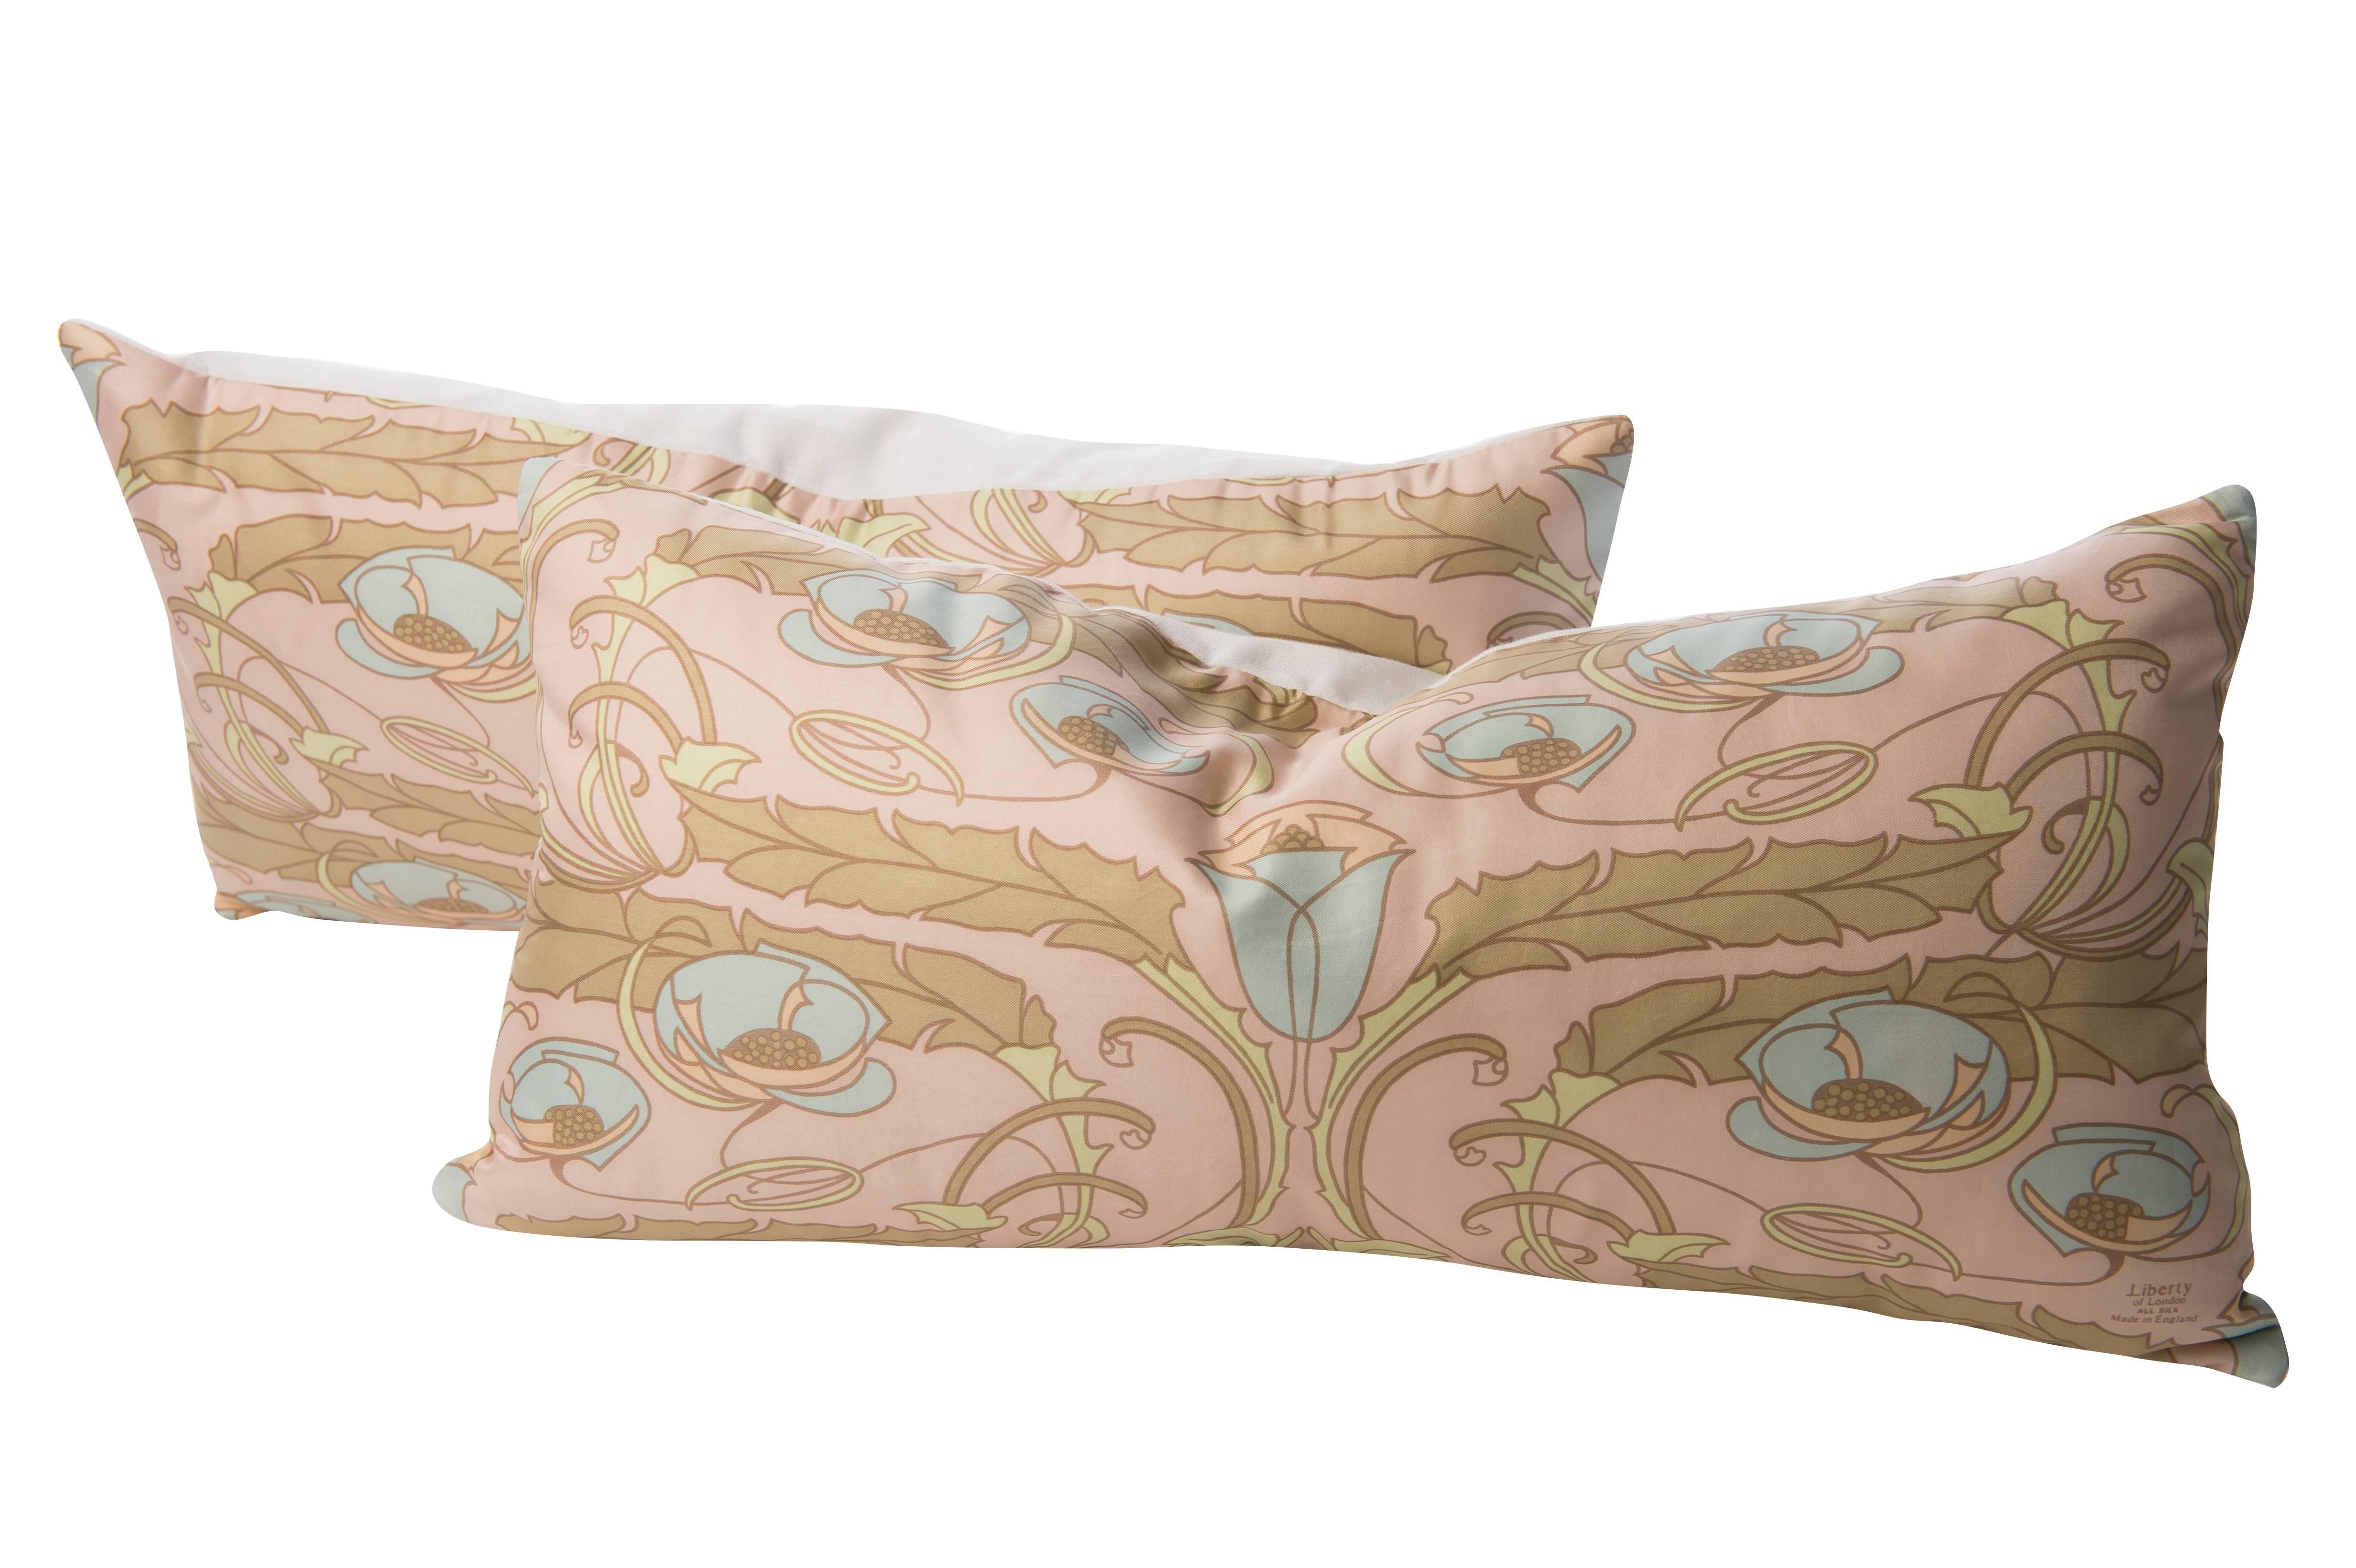 Pair of Vintage Liberty of London Silk Scarf with Irish Linen Cushions Pillows  For Sale 1